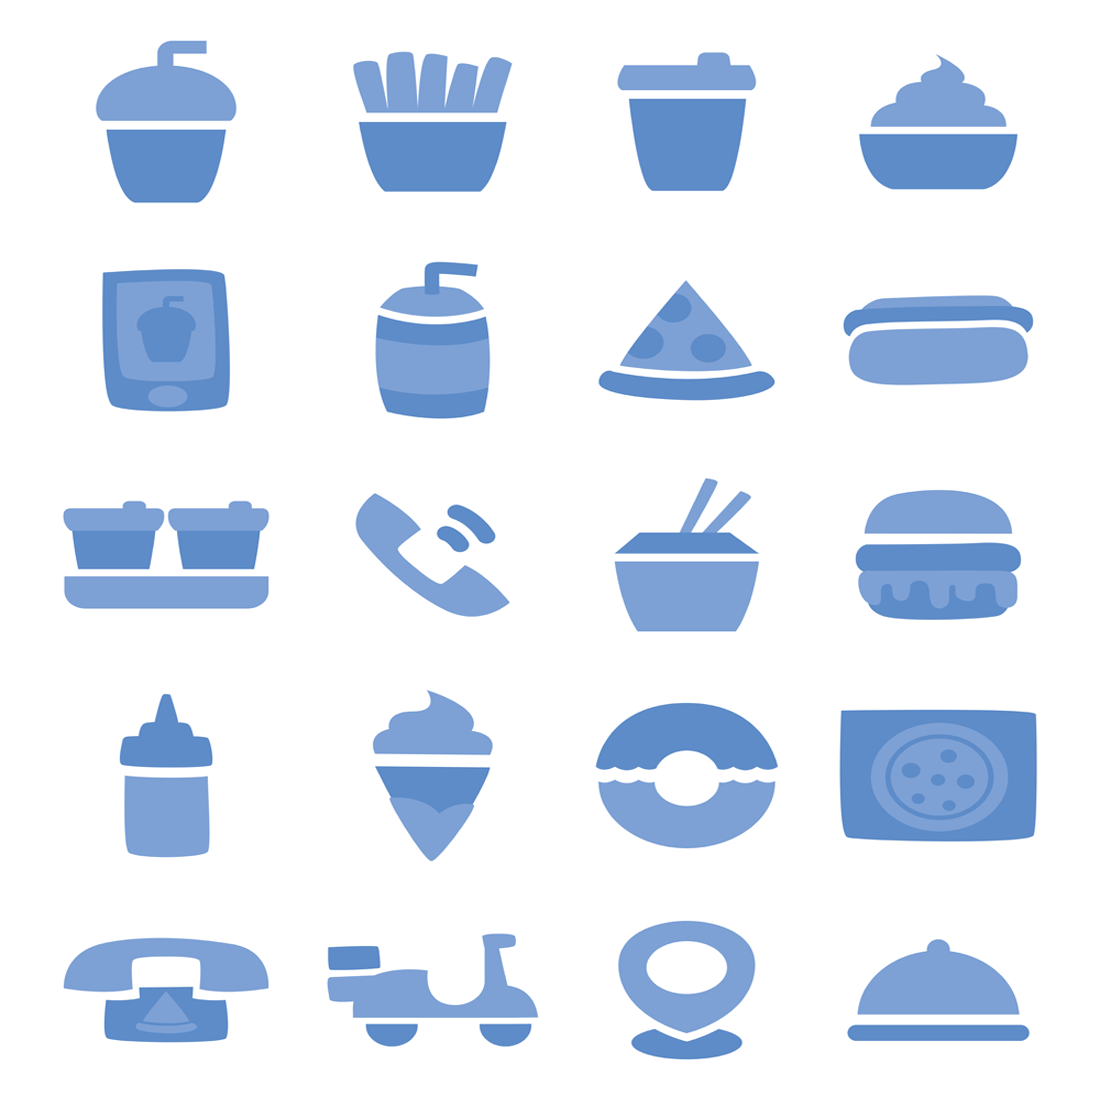 Images preview 20 minimal blue take away icons set.